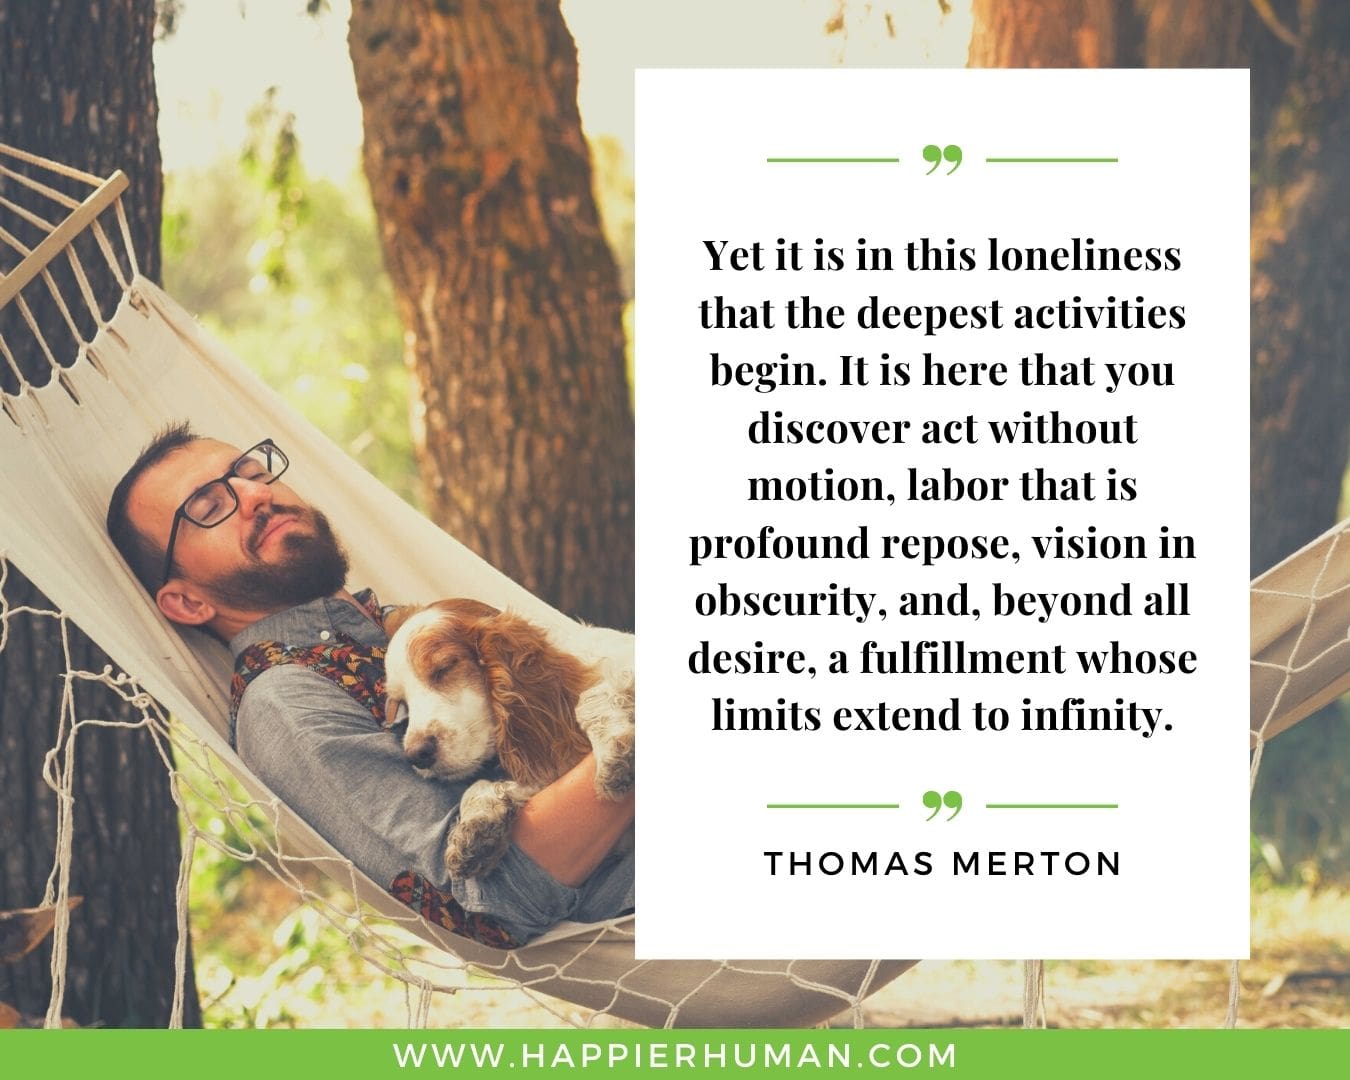 Loneliness Quotes - “Yet it is in this loneliness that the deepest activities begin. It is here that you discover act without motion, labor that is profound repose, vision in obscurity, and, beyond all desire, a fulfillment whose limits extend to infinity.”– Thomas Merton